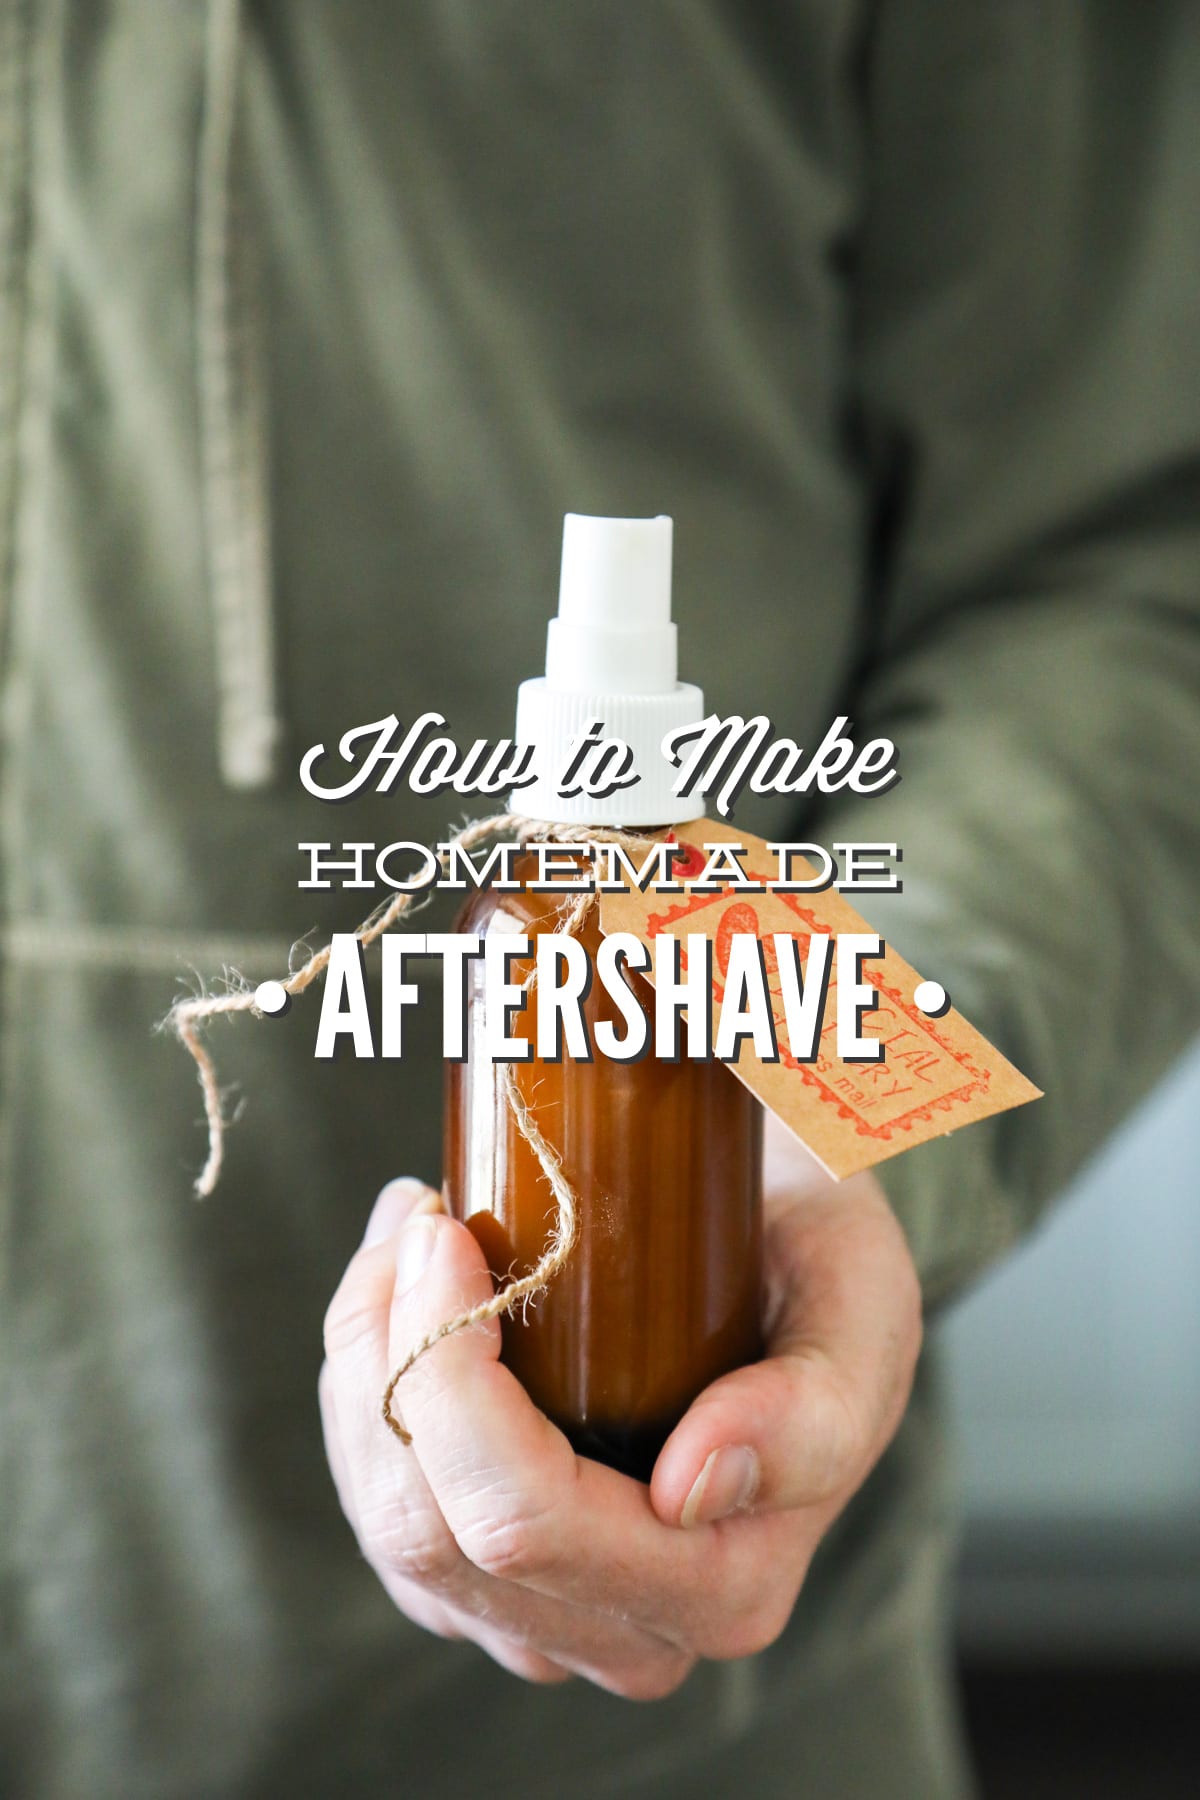 How to Make Homemade Aftershave